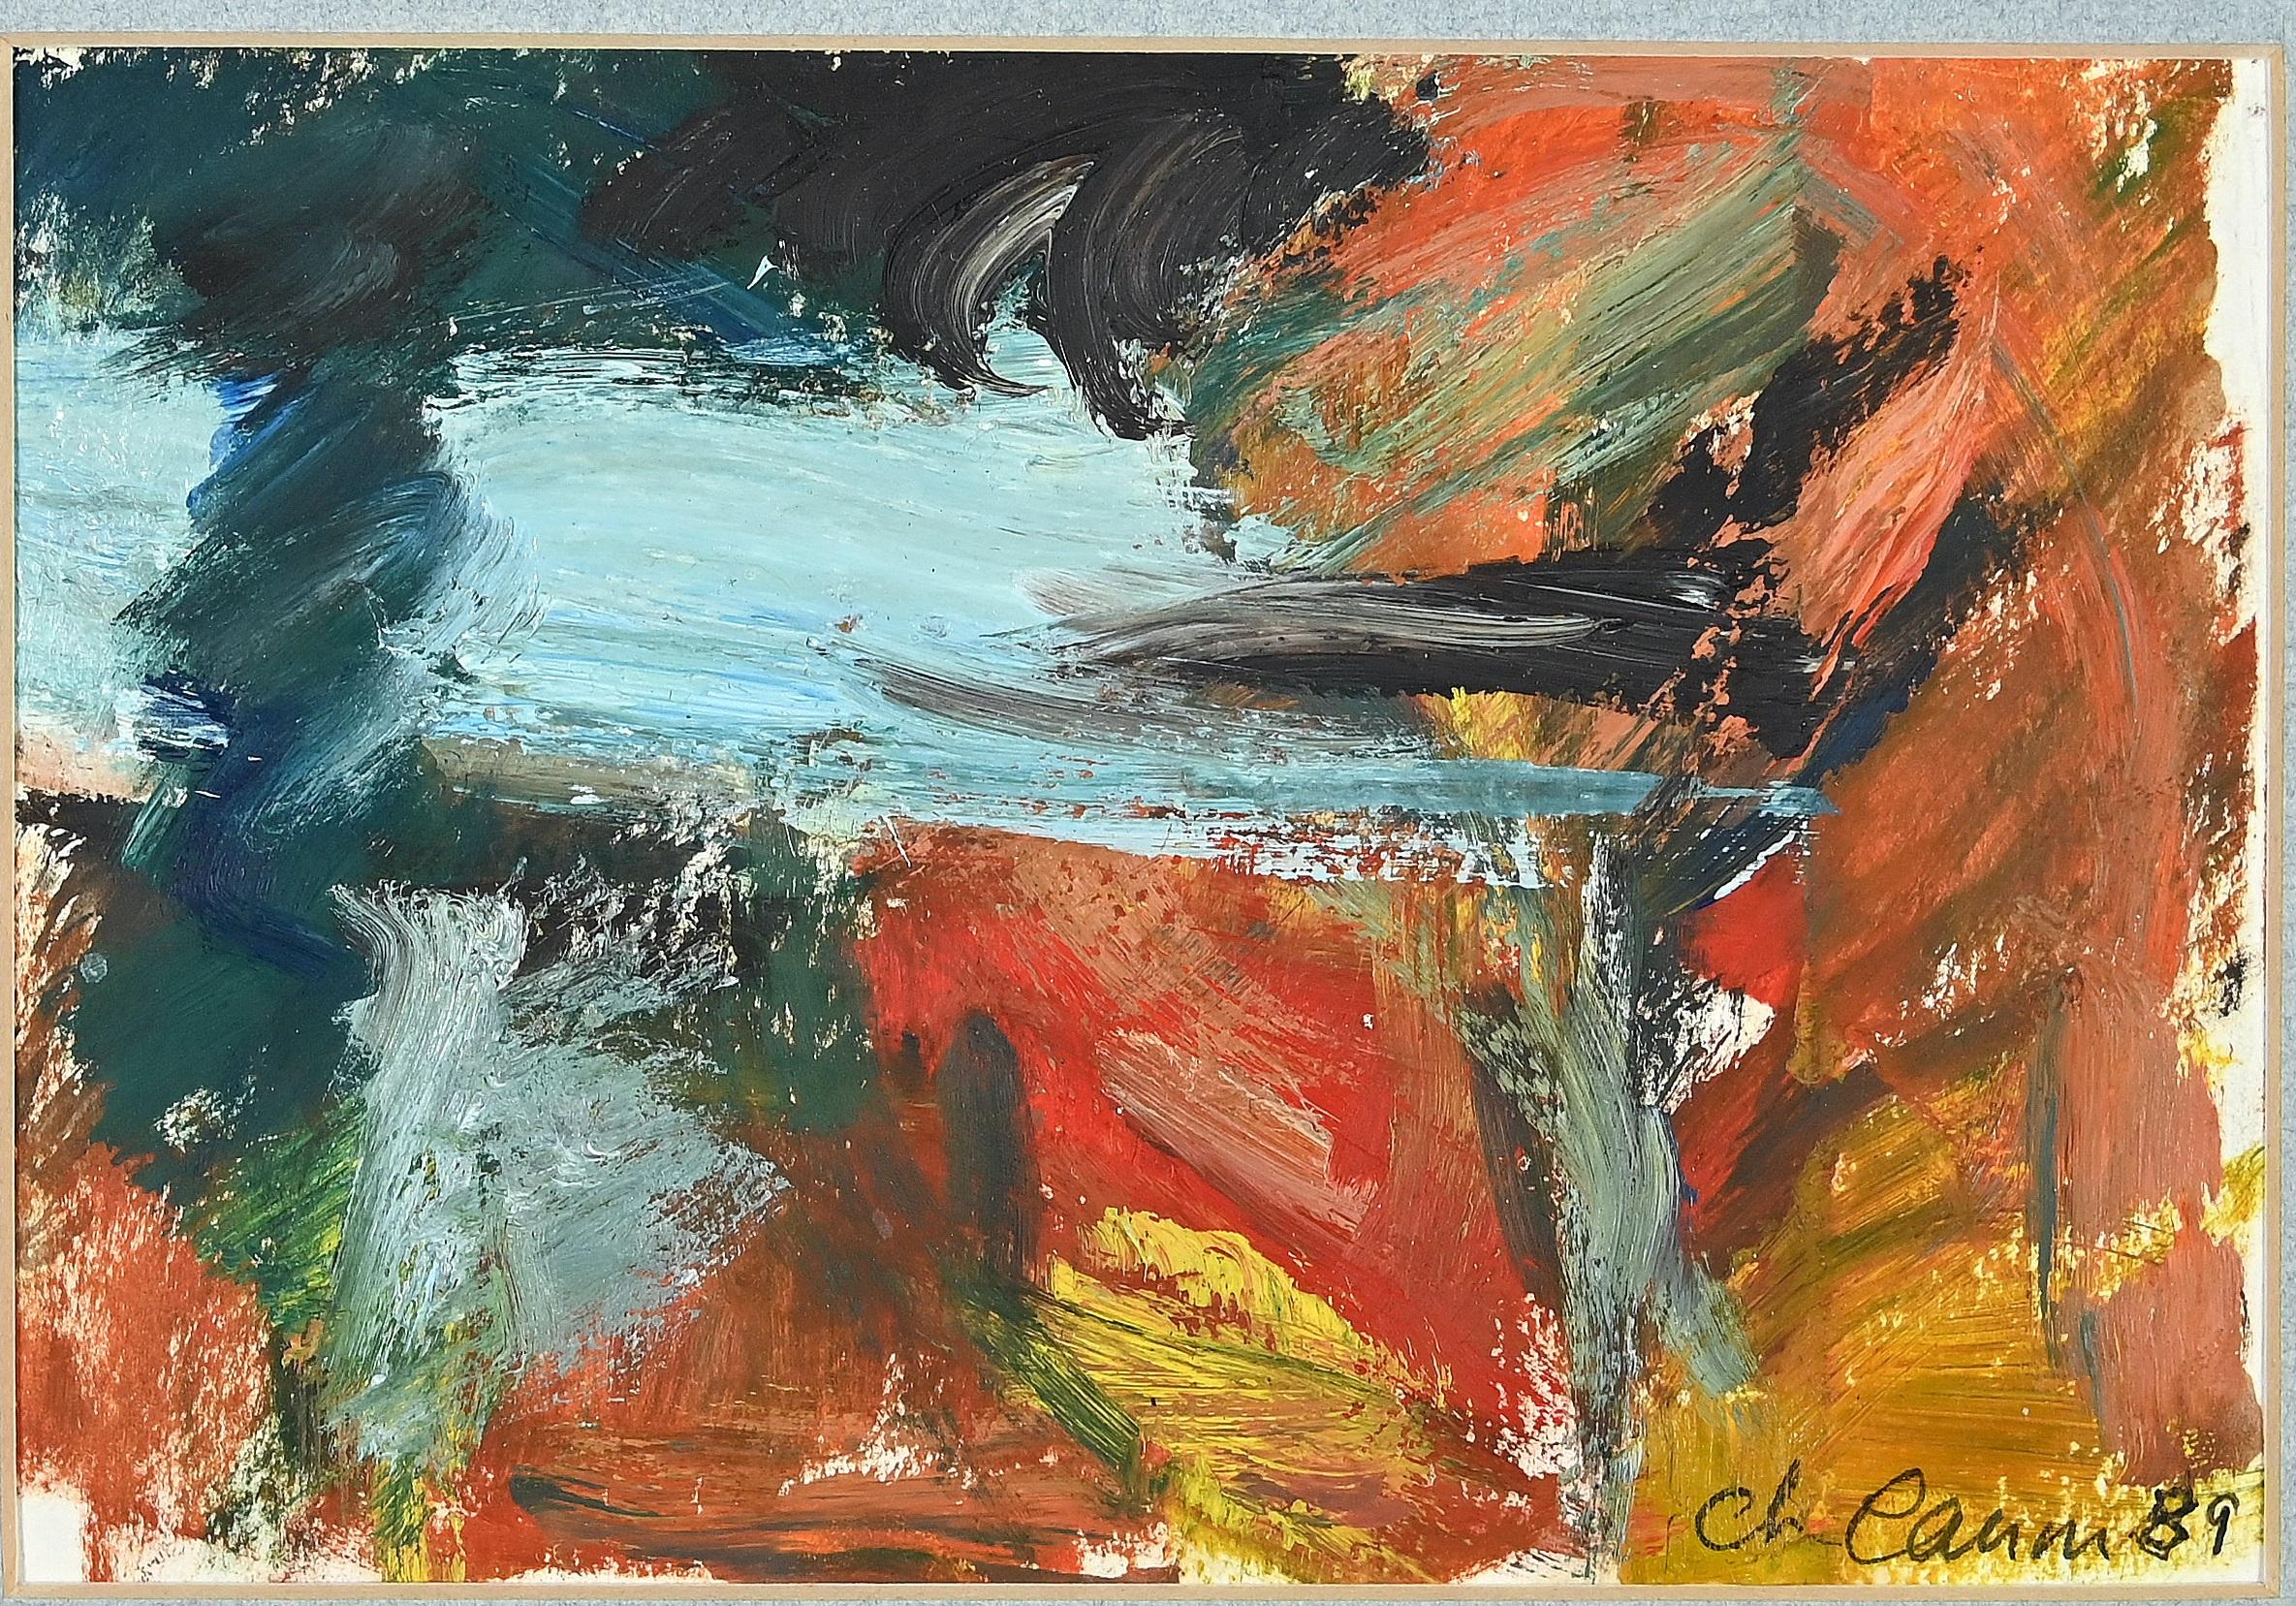 Composition - Original Oil on Cardboard - 1989 - Painting by Unknown